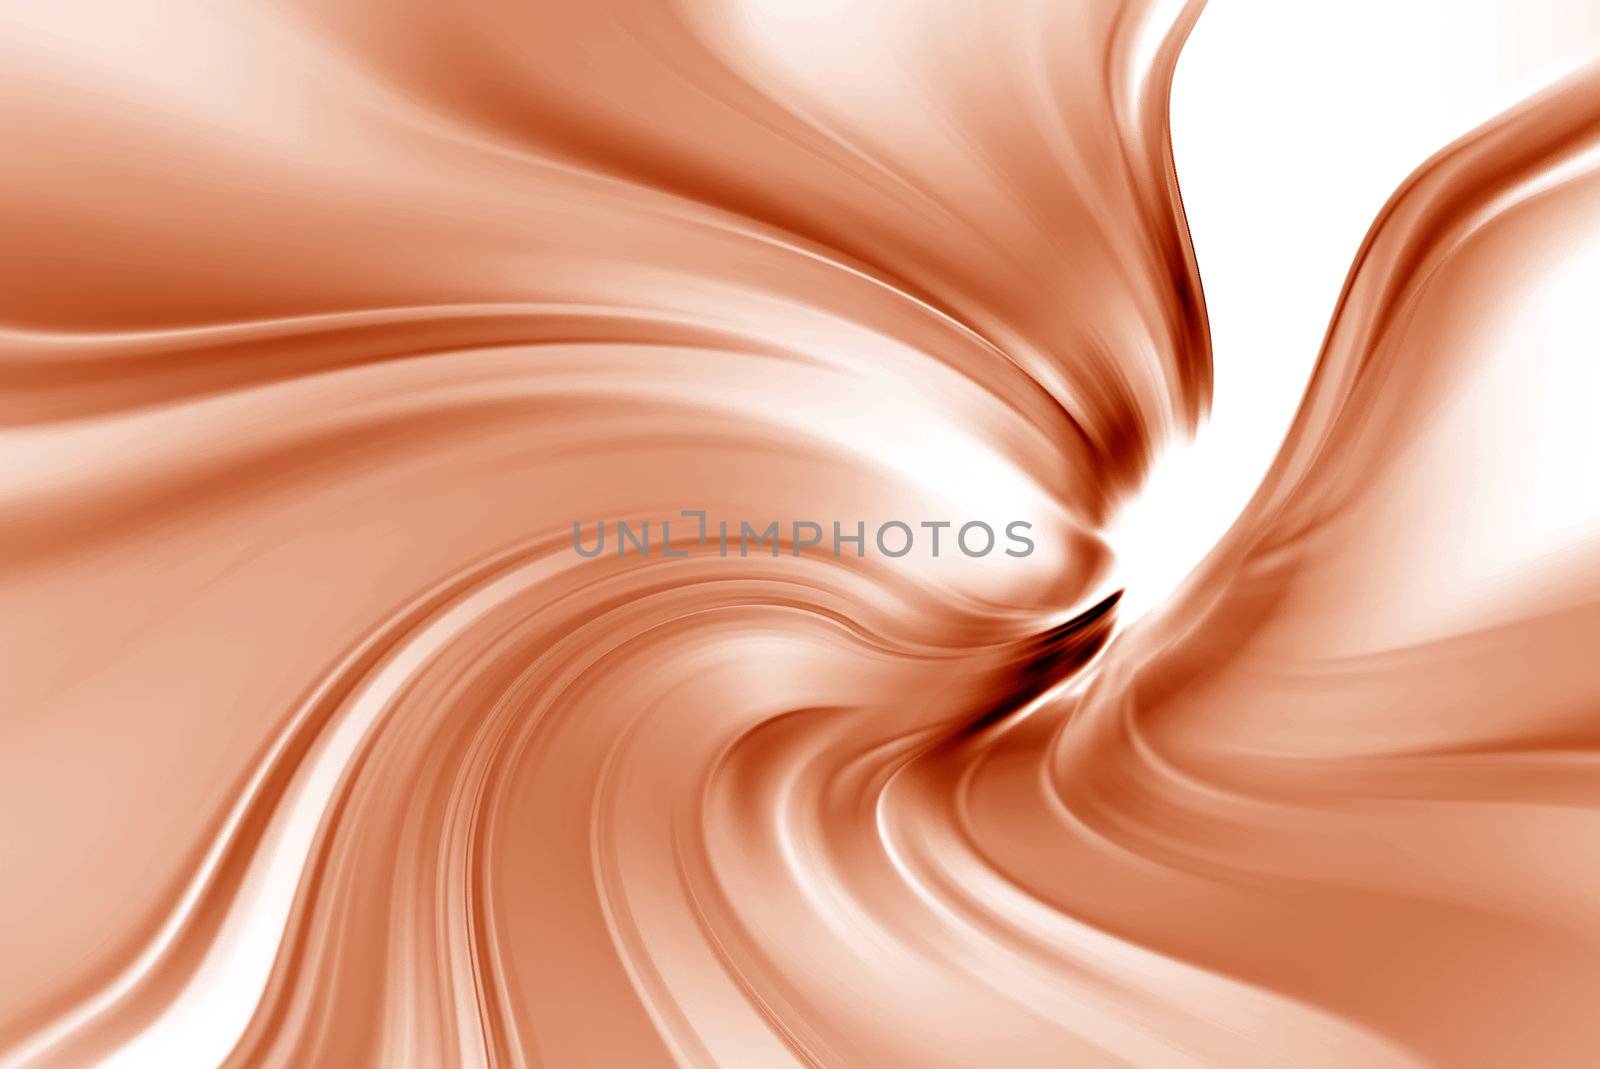 It is a beautiful abstract light background.